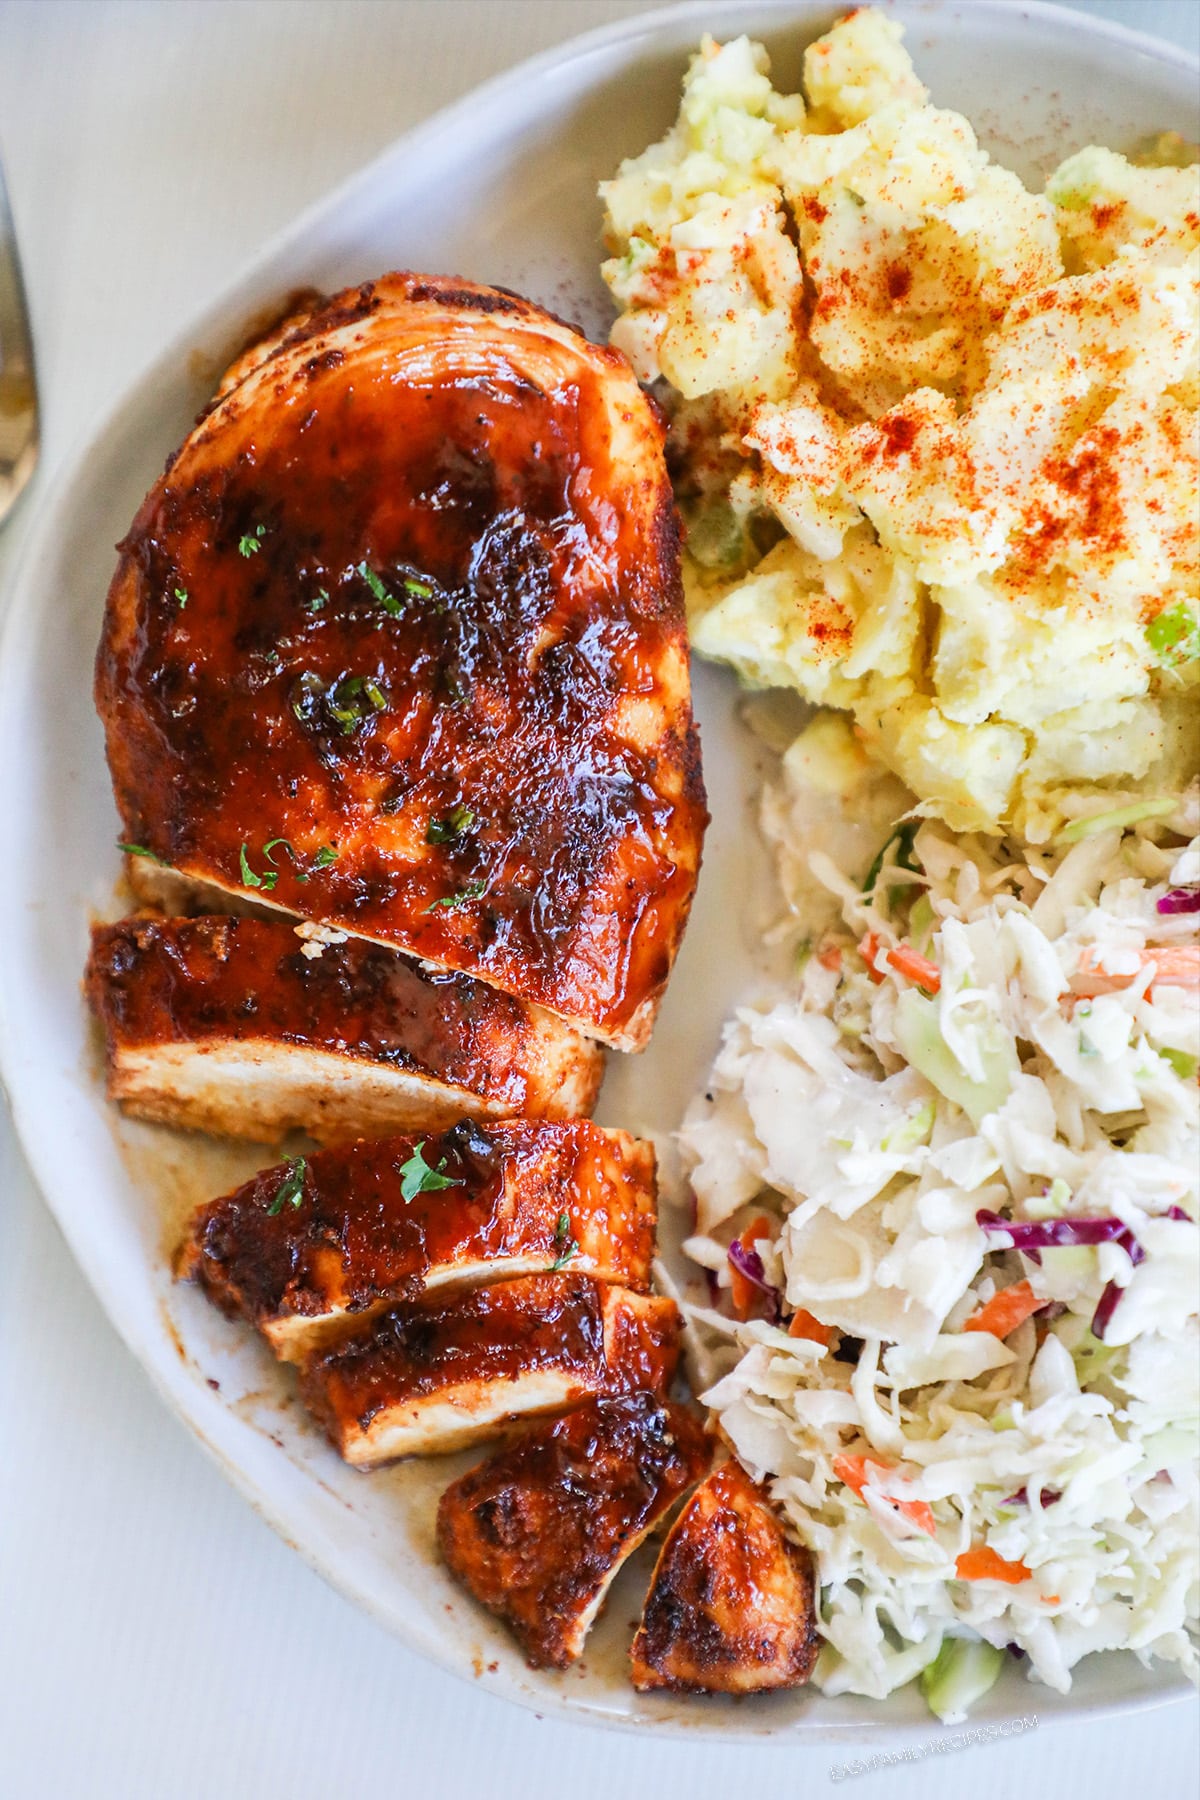 a partially sliced oven baked BBQ chicken breast on a plate with coleslaw and potato salad from above.